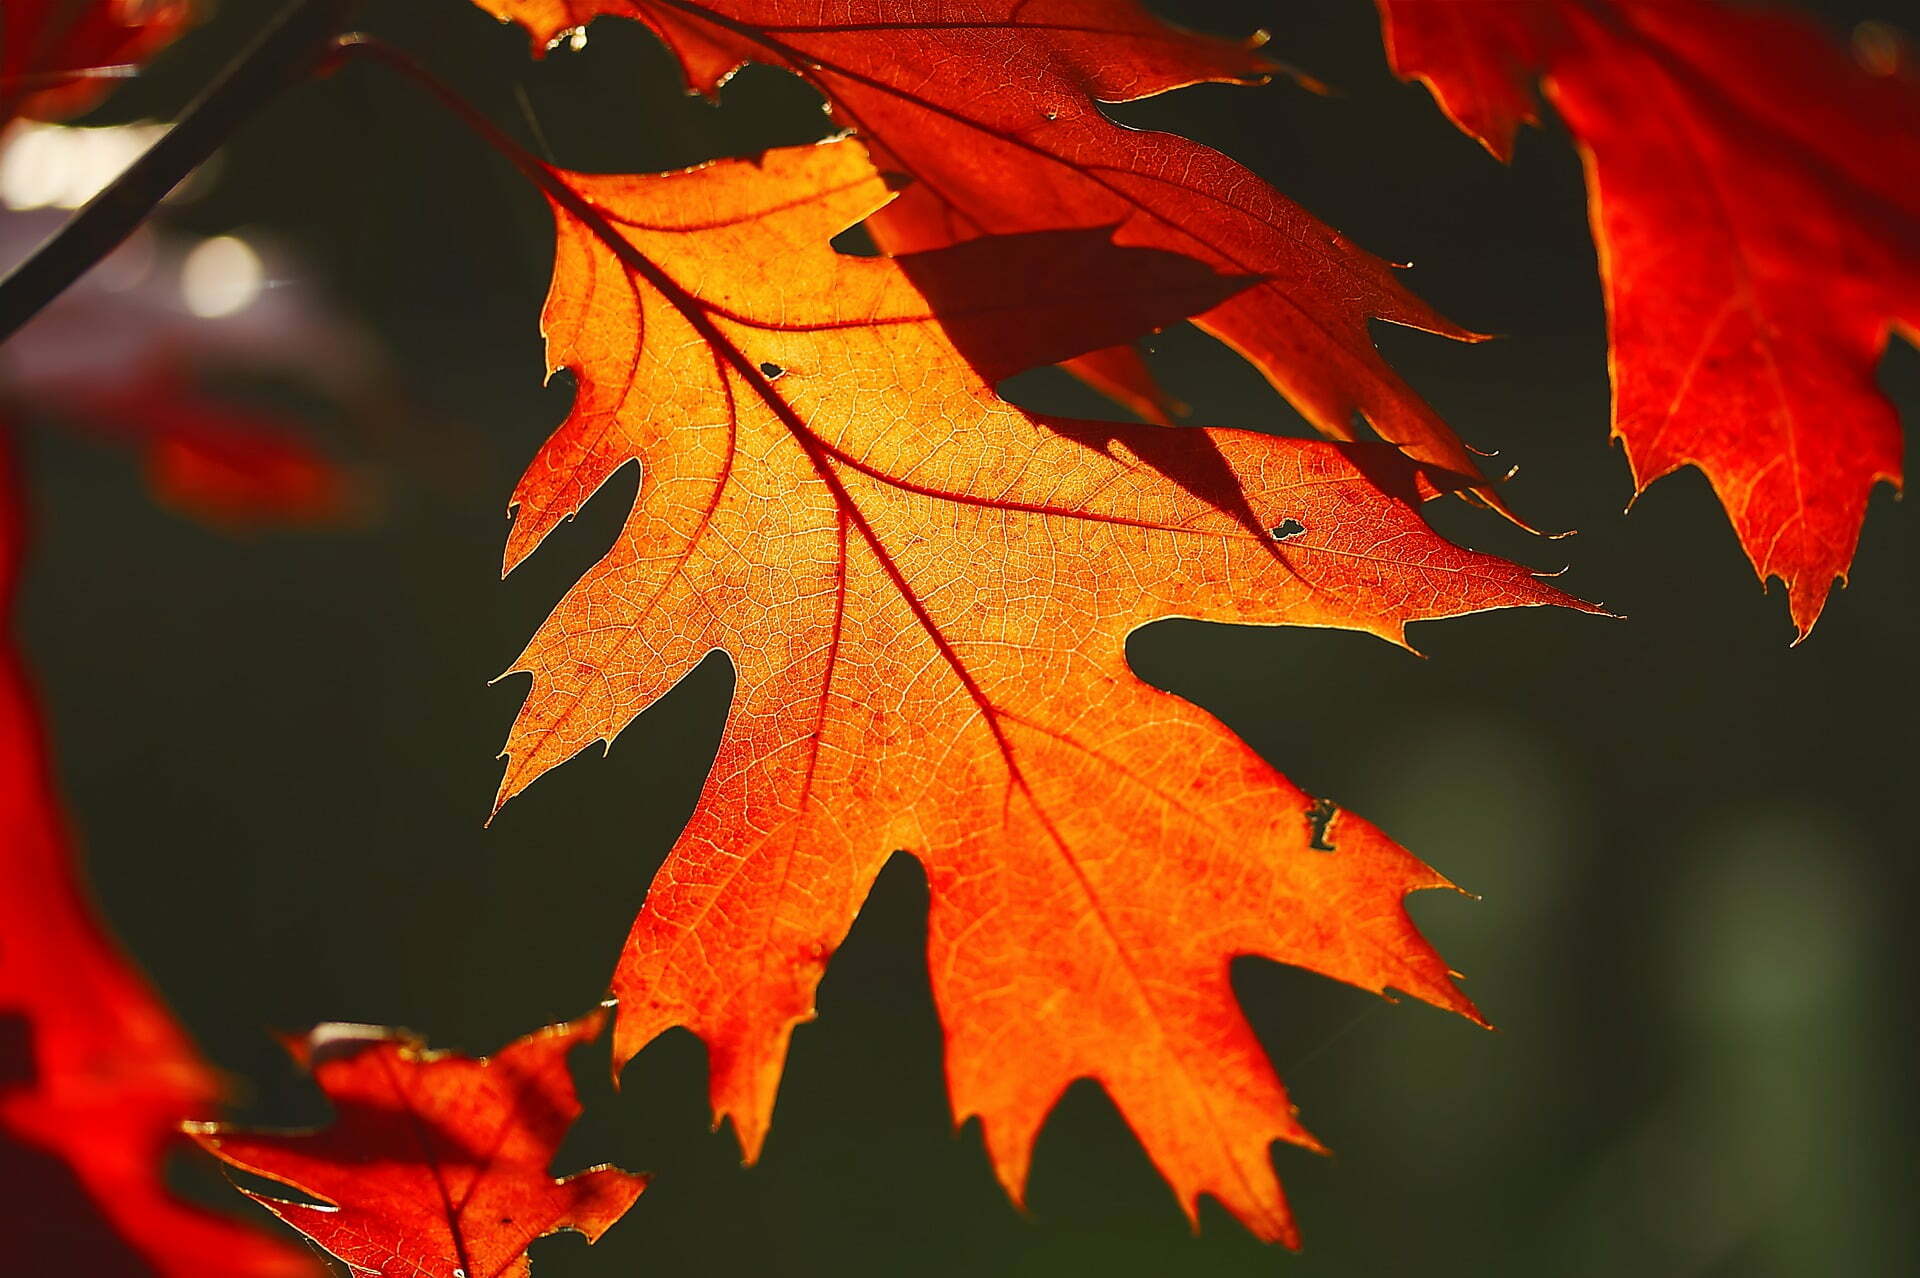 Ornage, red autumn leaf. Jon Gardner Voice Overs, thankful for humble beginnings.